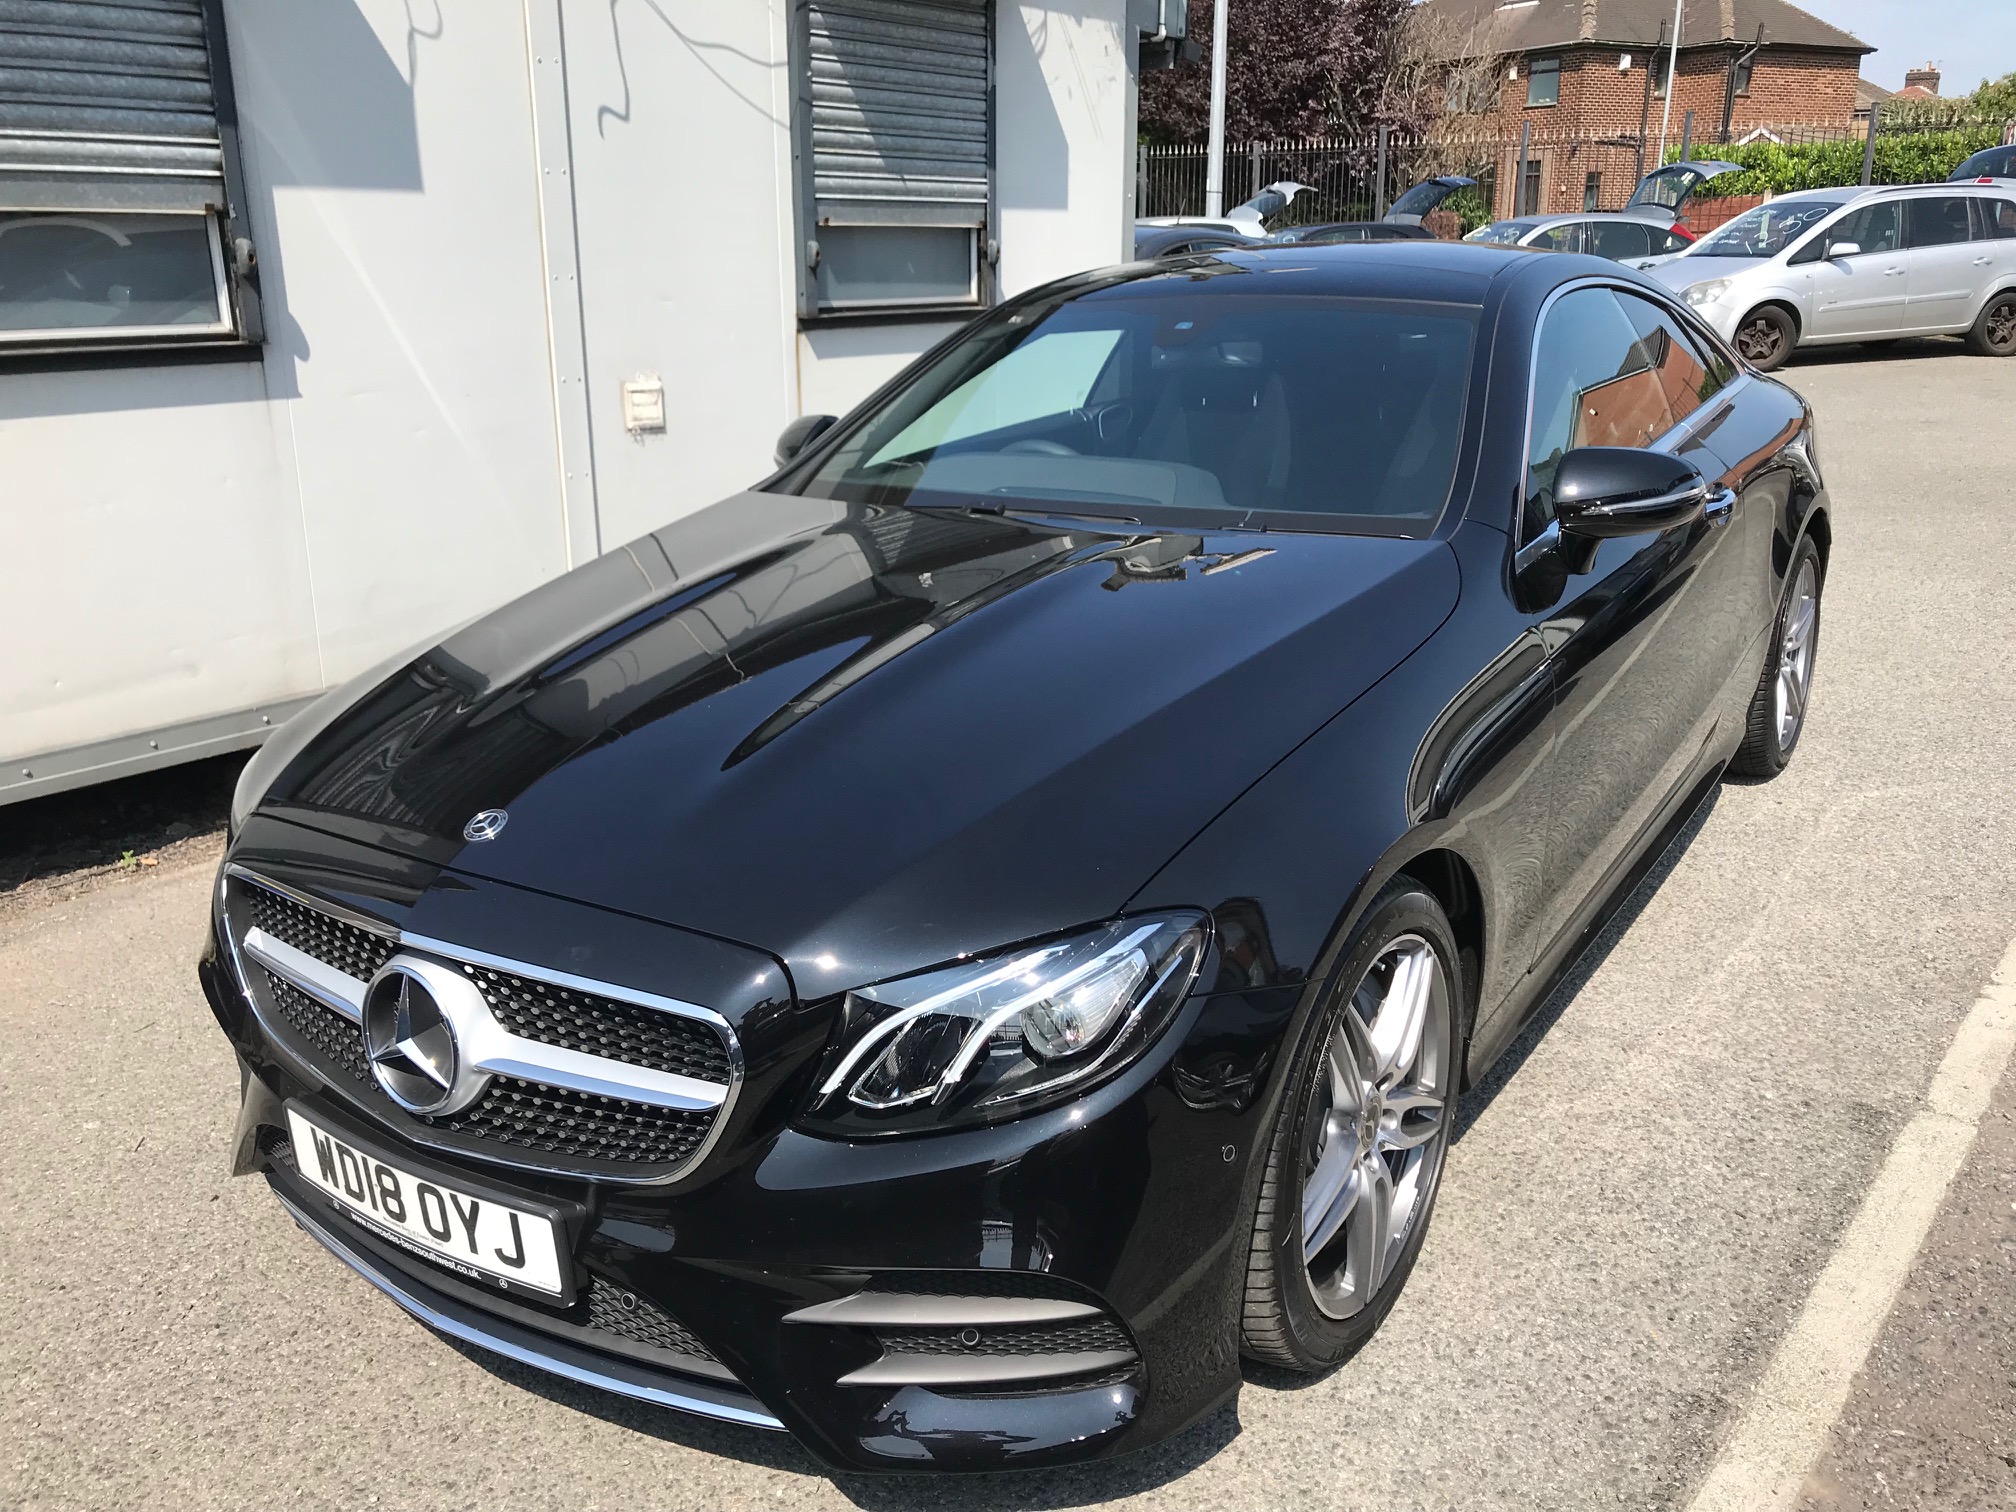 In Review Mercedes 00 Amg Line Premium 2dr 9g Tronic Petrol Carlease Uk